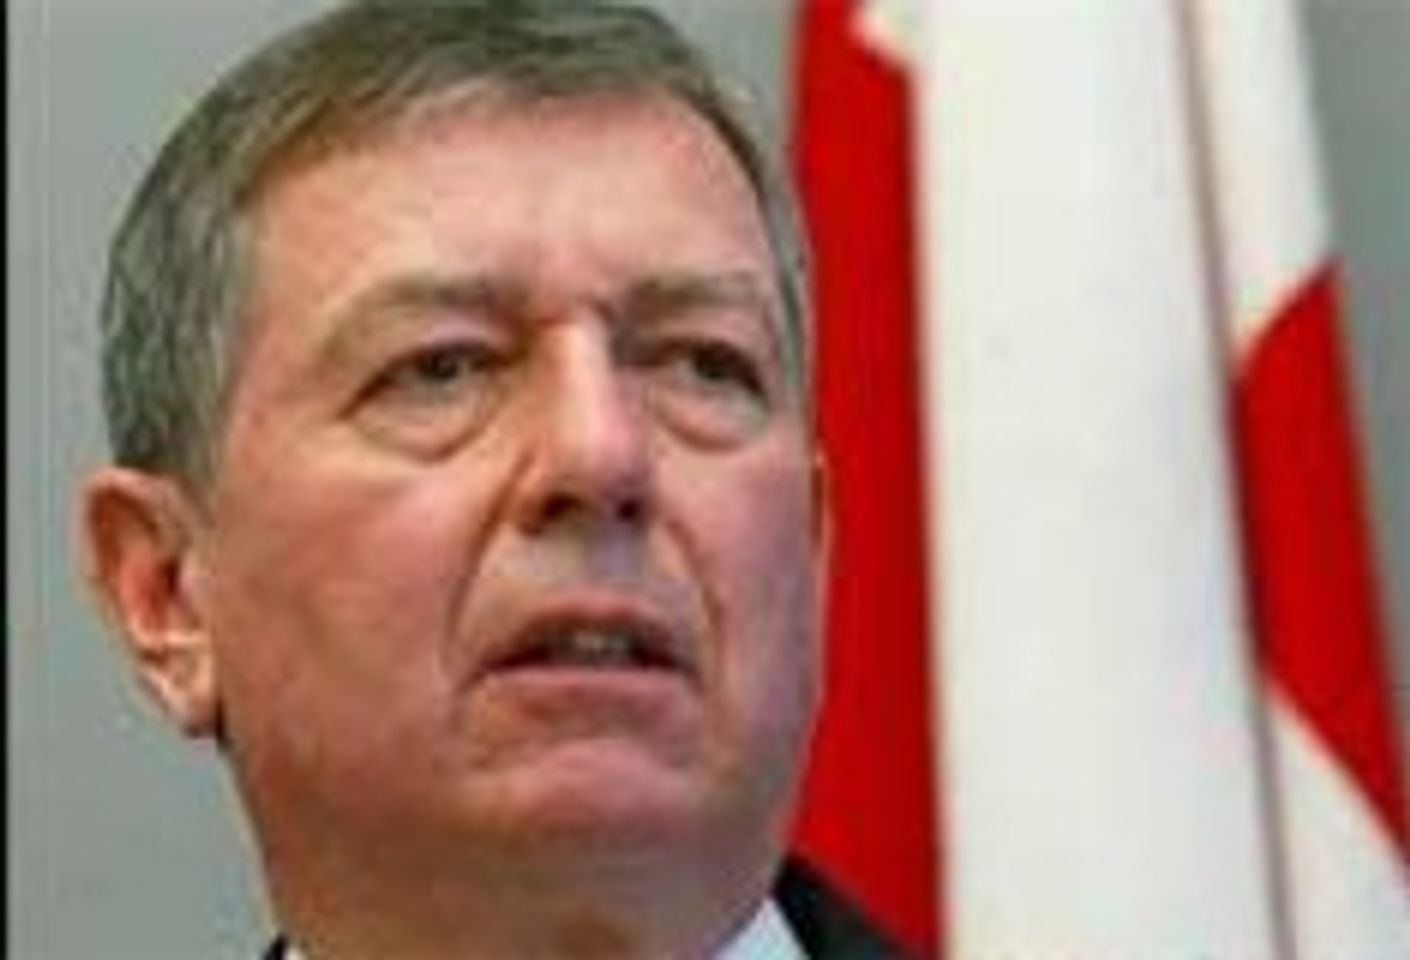 Anti-Porn Groups Upset by Ashcroft's Performance